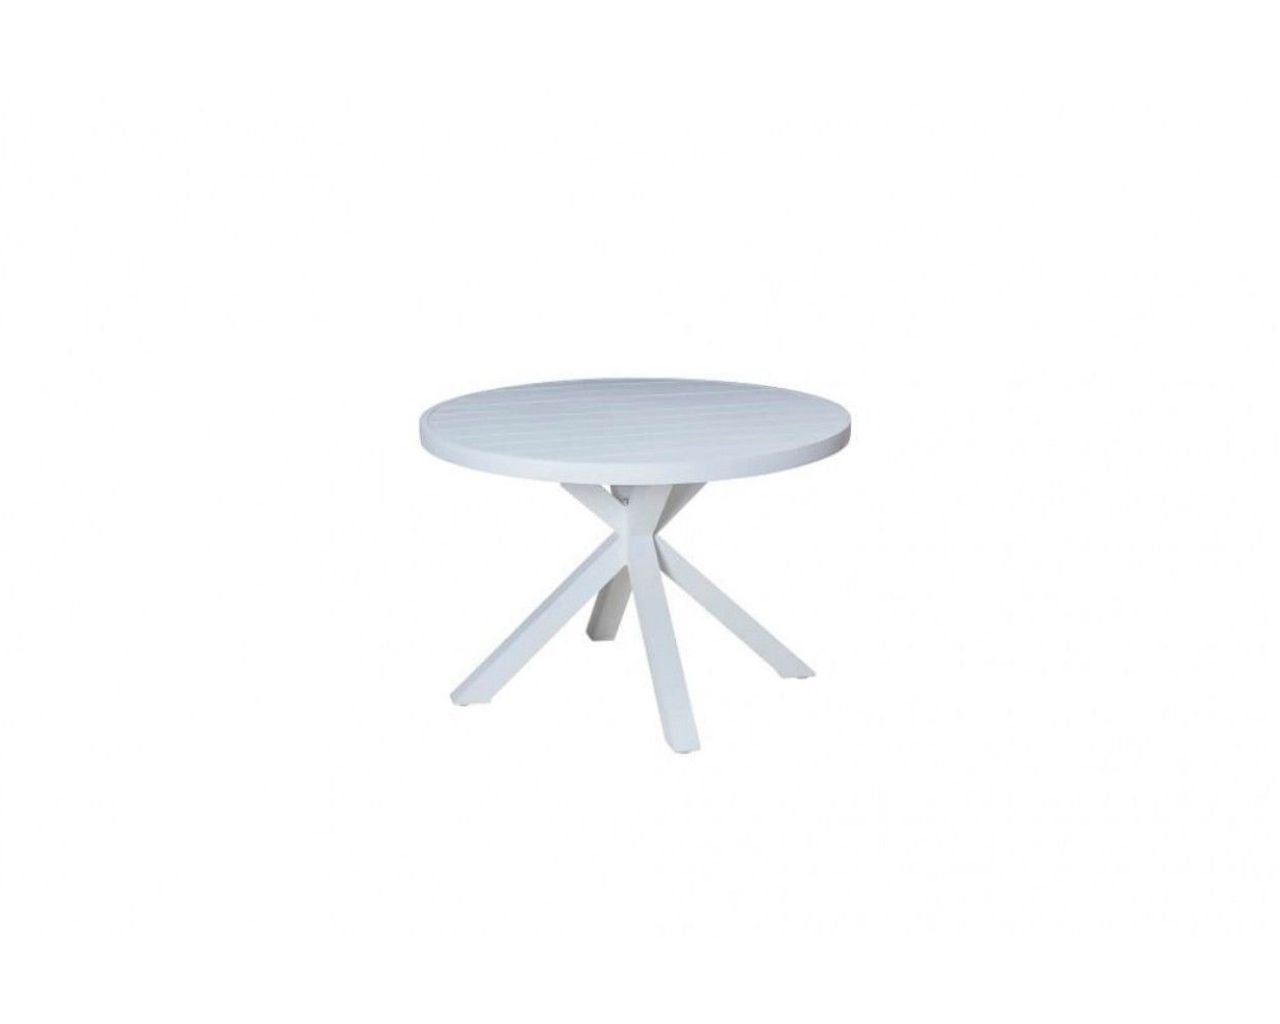 Jette Round Dining Table 107.5cm (white), , hi-res image number null